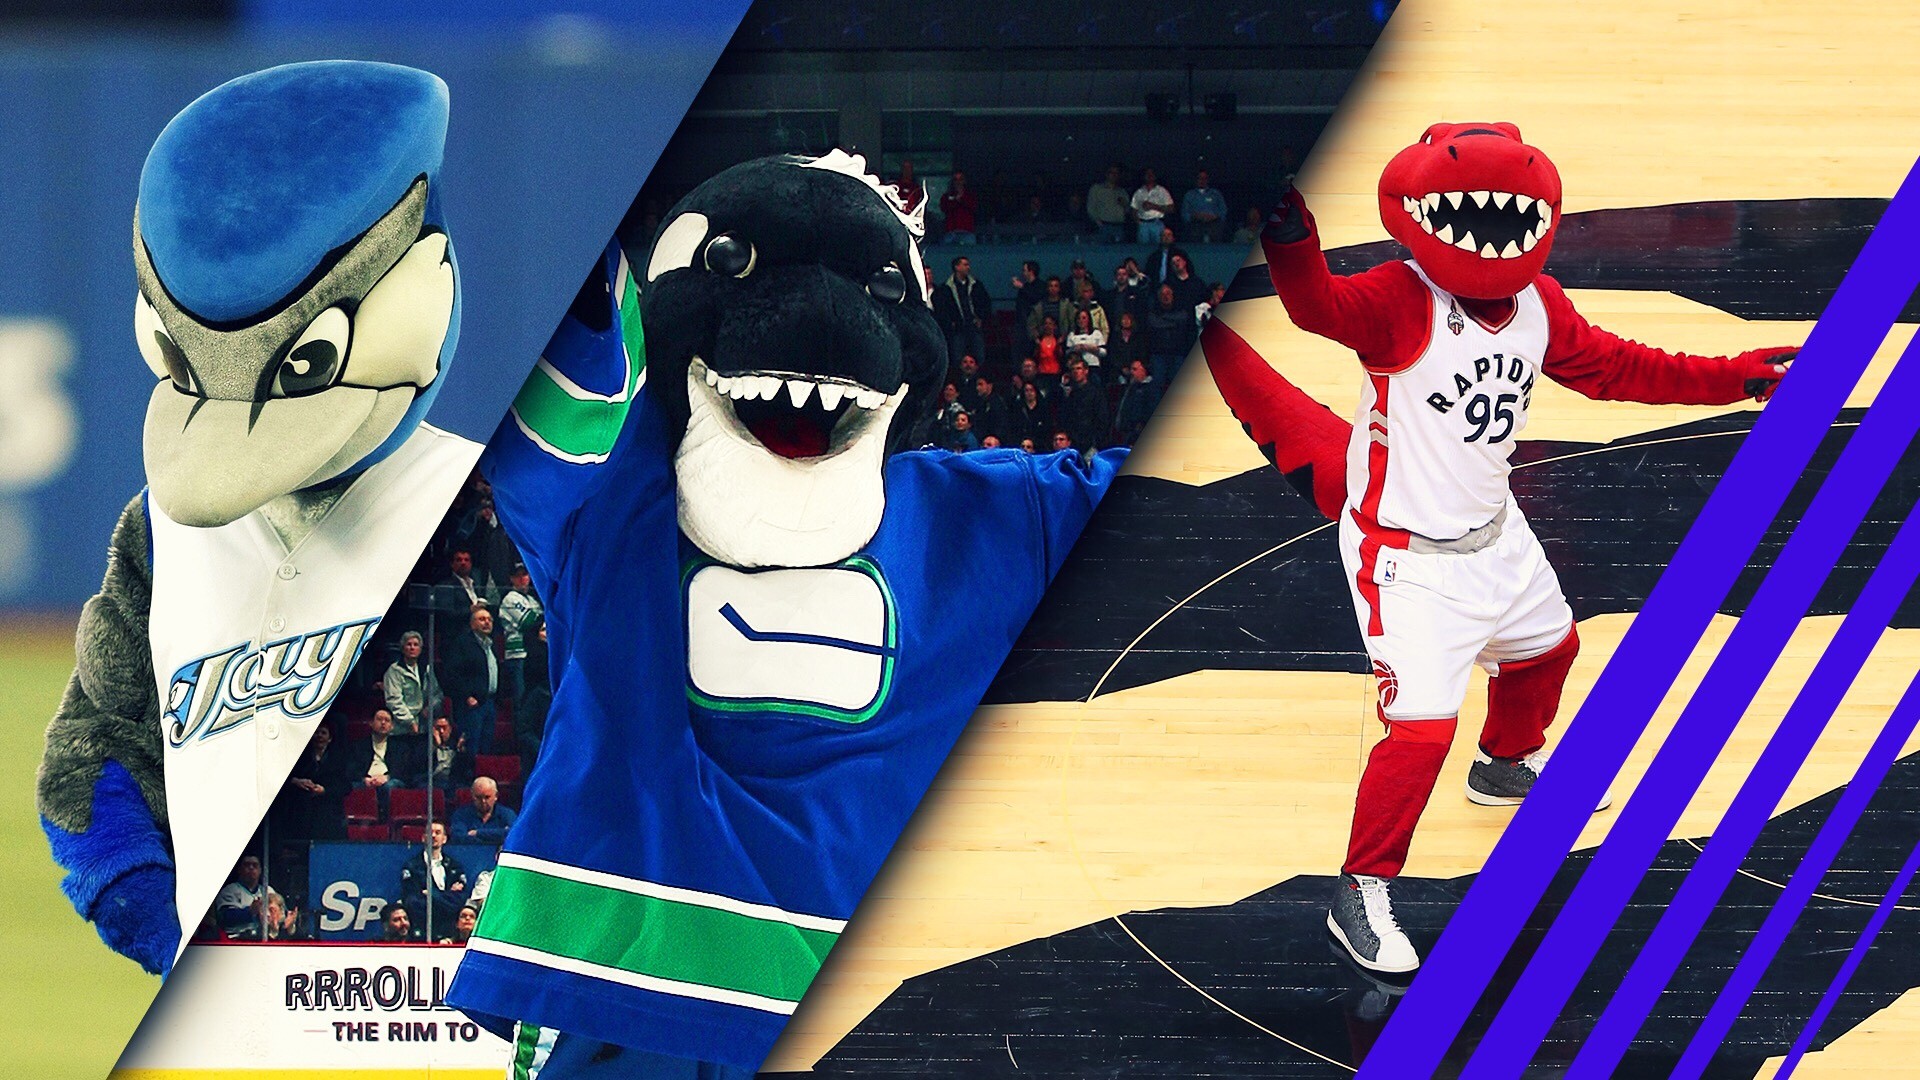 1920x1080 From The Raptor to Mick E. Moose: Canadian team mascots ranked